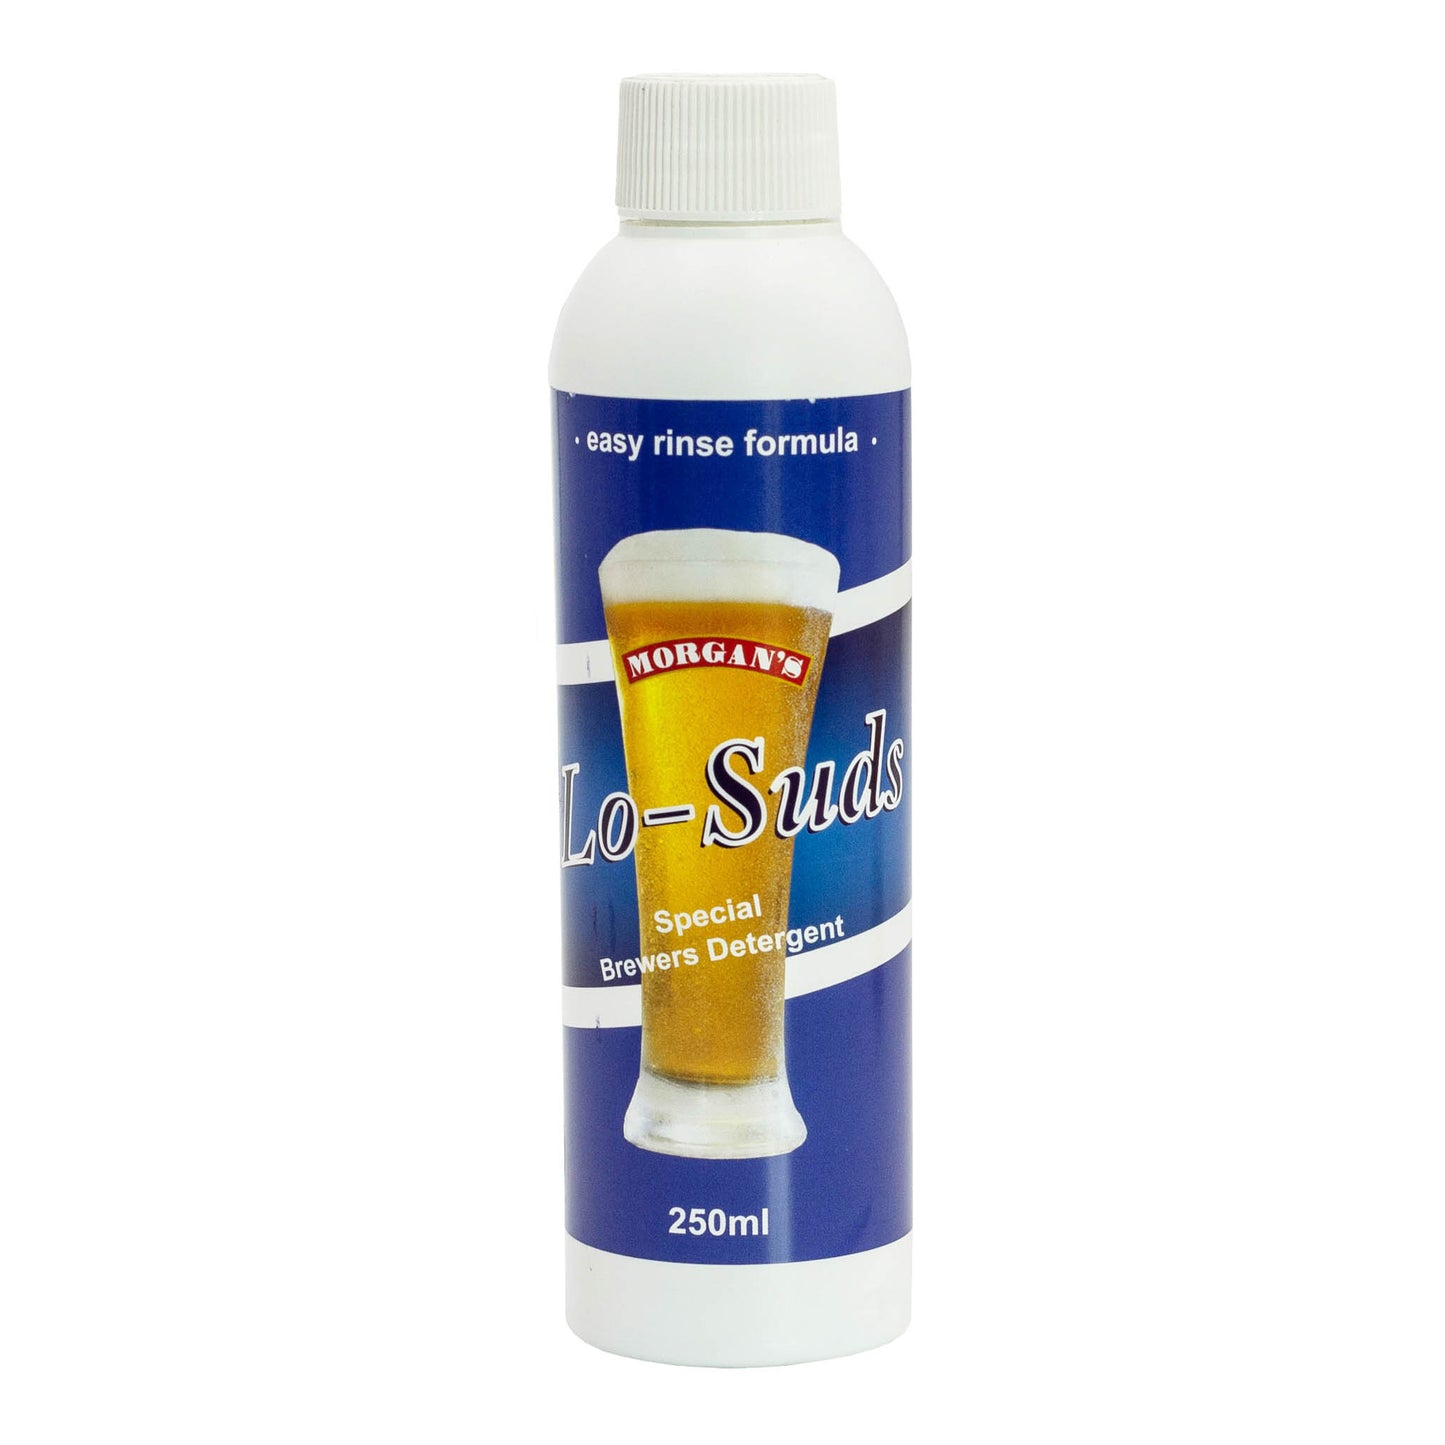 250ml bottle of Morgans Lo-Suds brewers detergent for easy rinse and sanitise. 